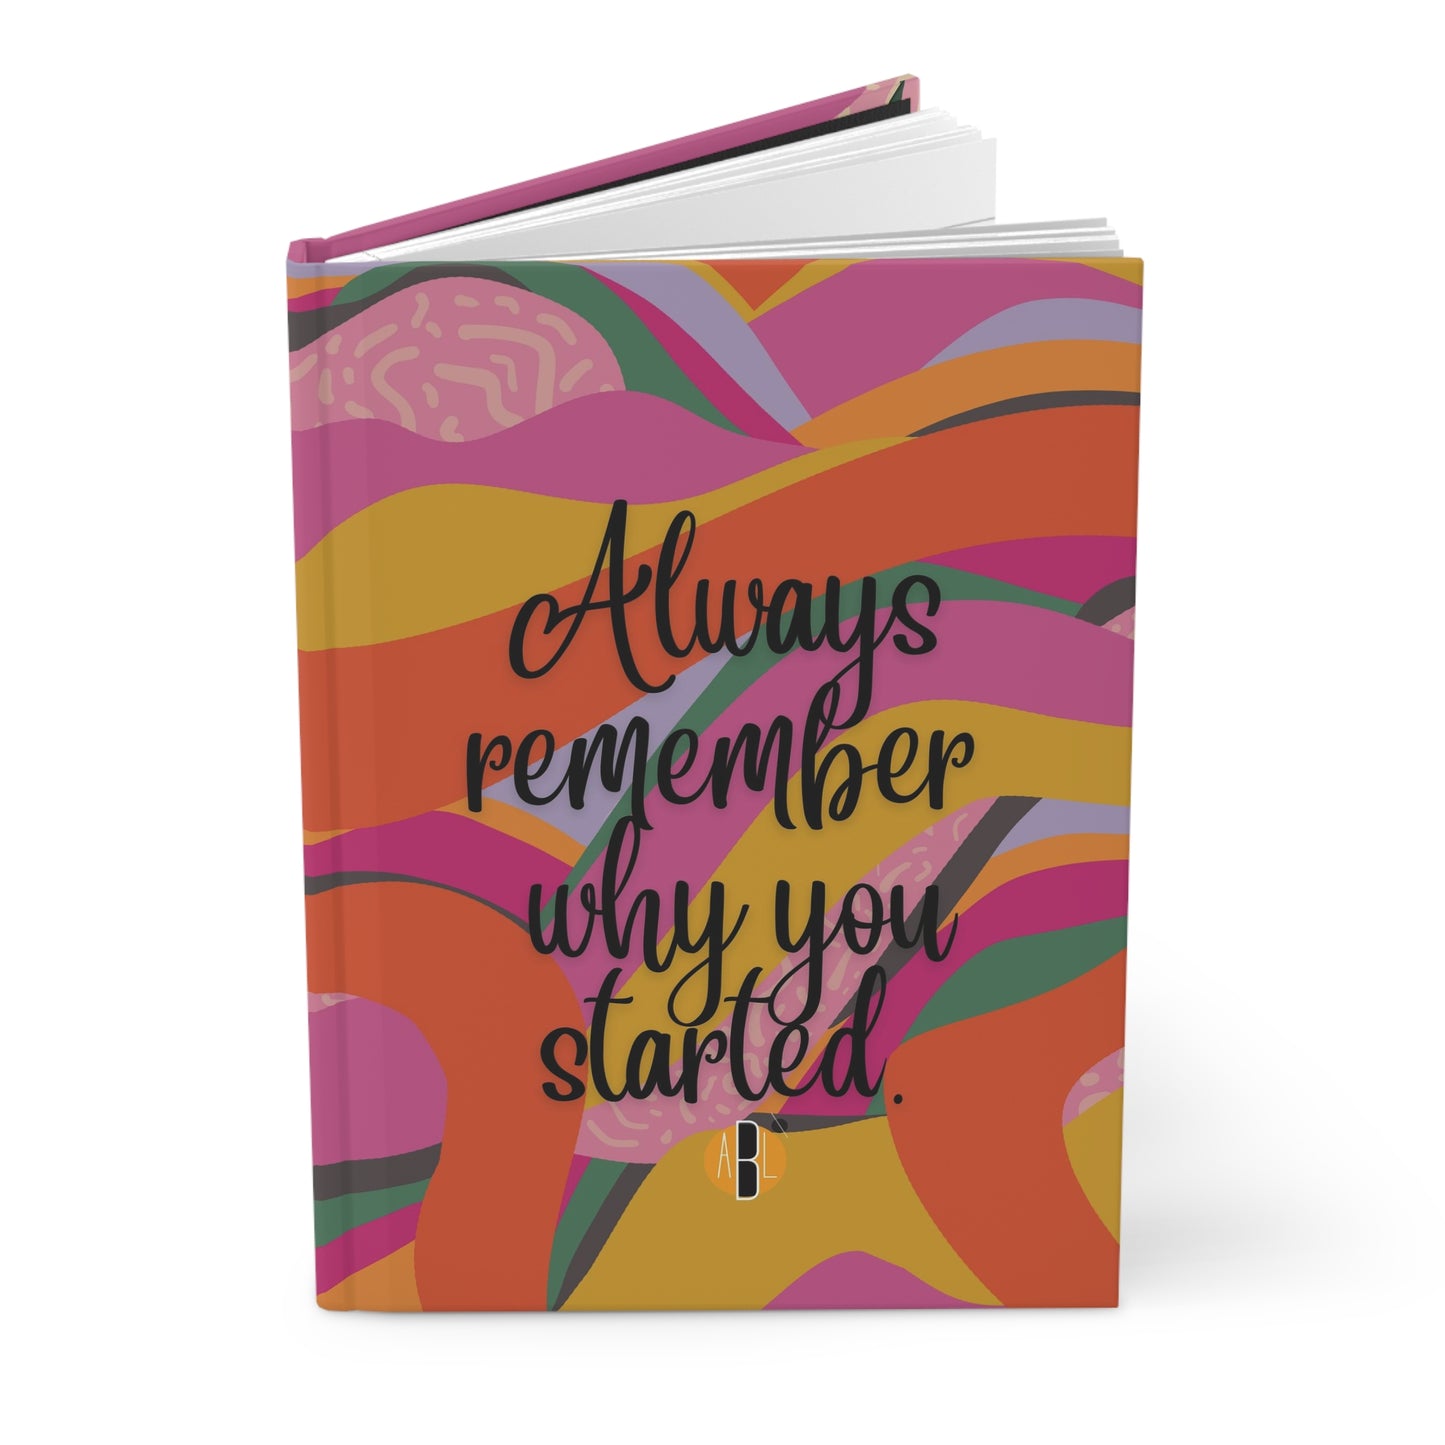 ABL Inspirational Hardcover Journal: " Always remember..."